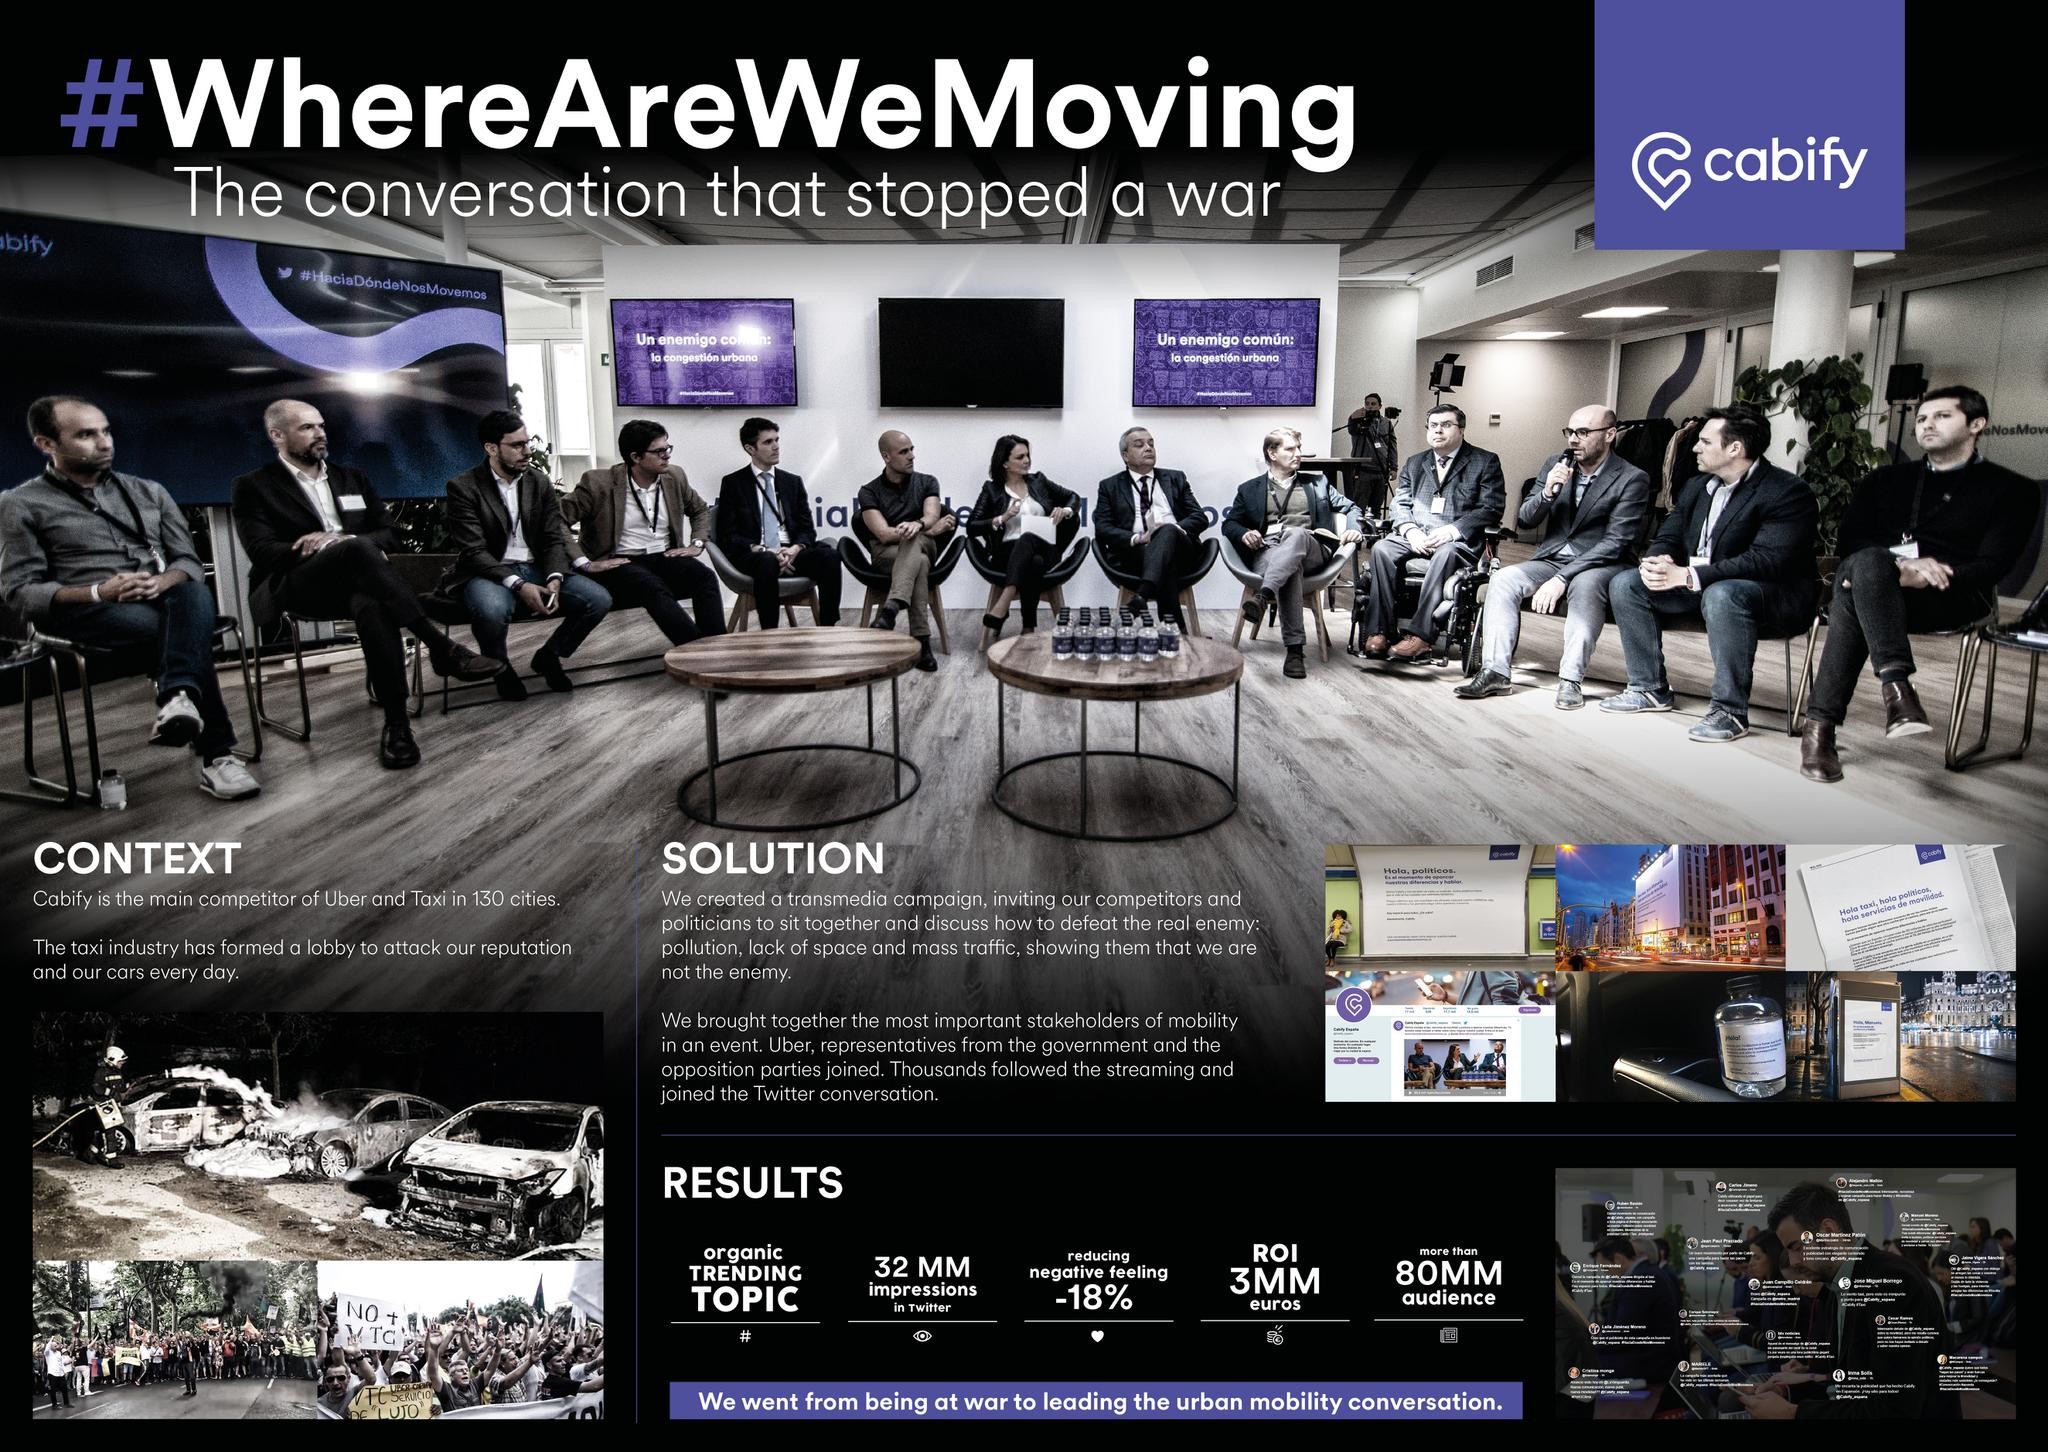 #WhereAreWeMoving. The Conversation That Stopped A War